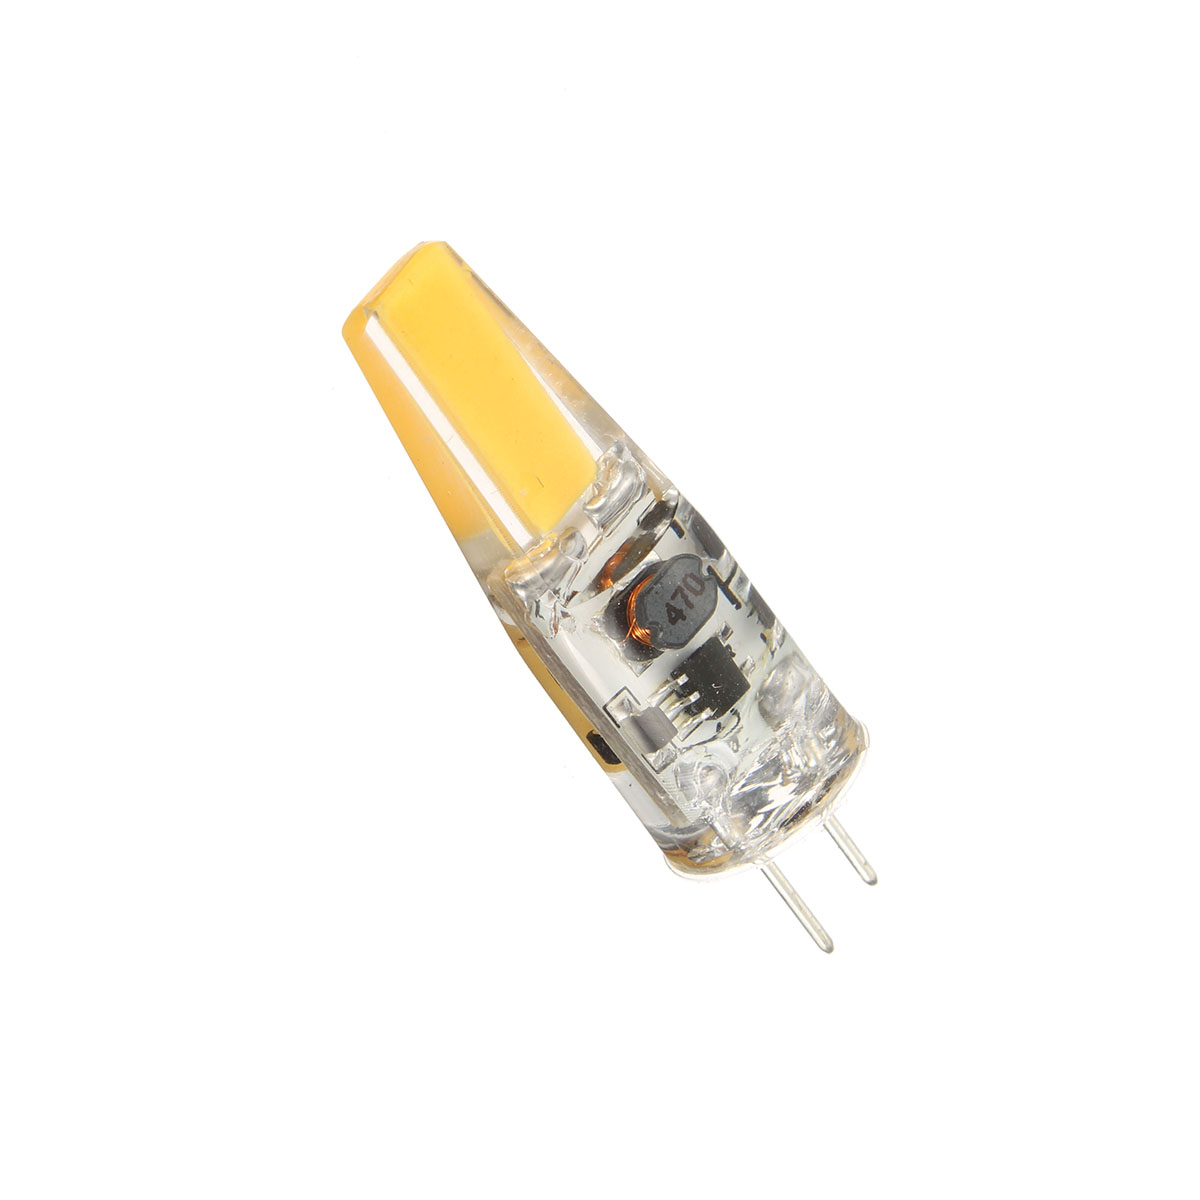 20X-Dimmable-G4-2W-Warm-White-COB-LED-Bulb-Chandelier-Light-Replace-Halogen-Lamps-DCAC12V-1454552-4